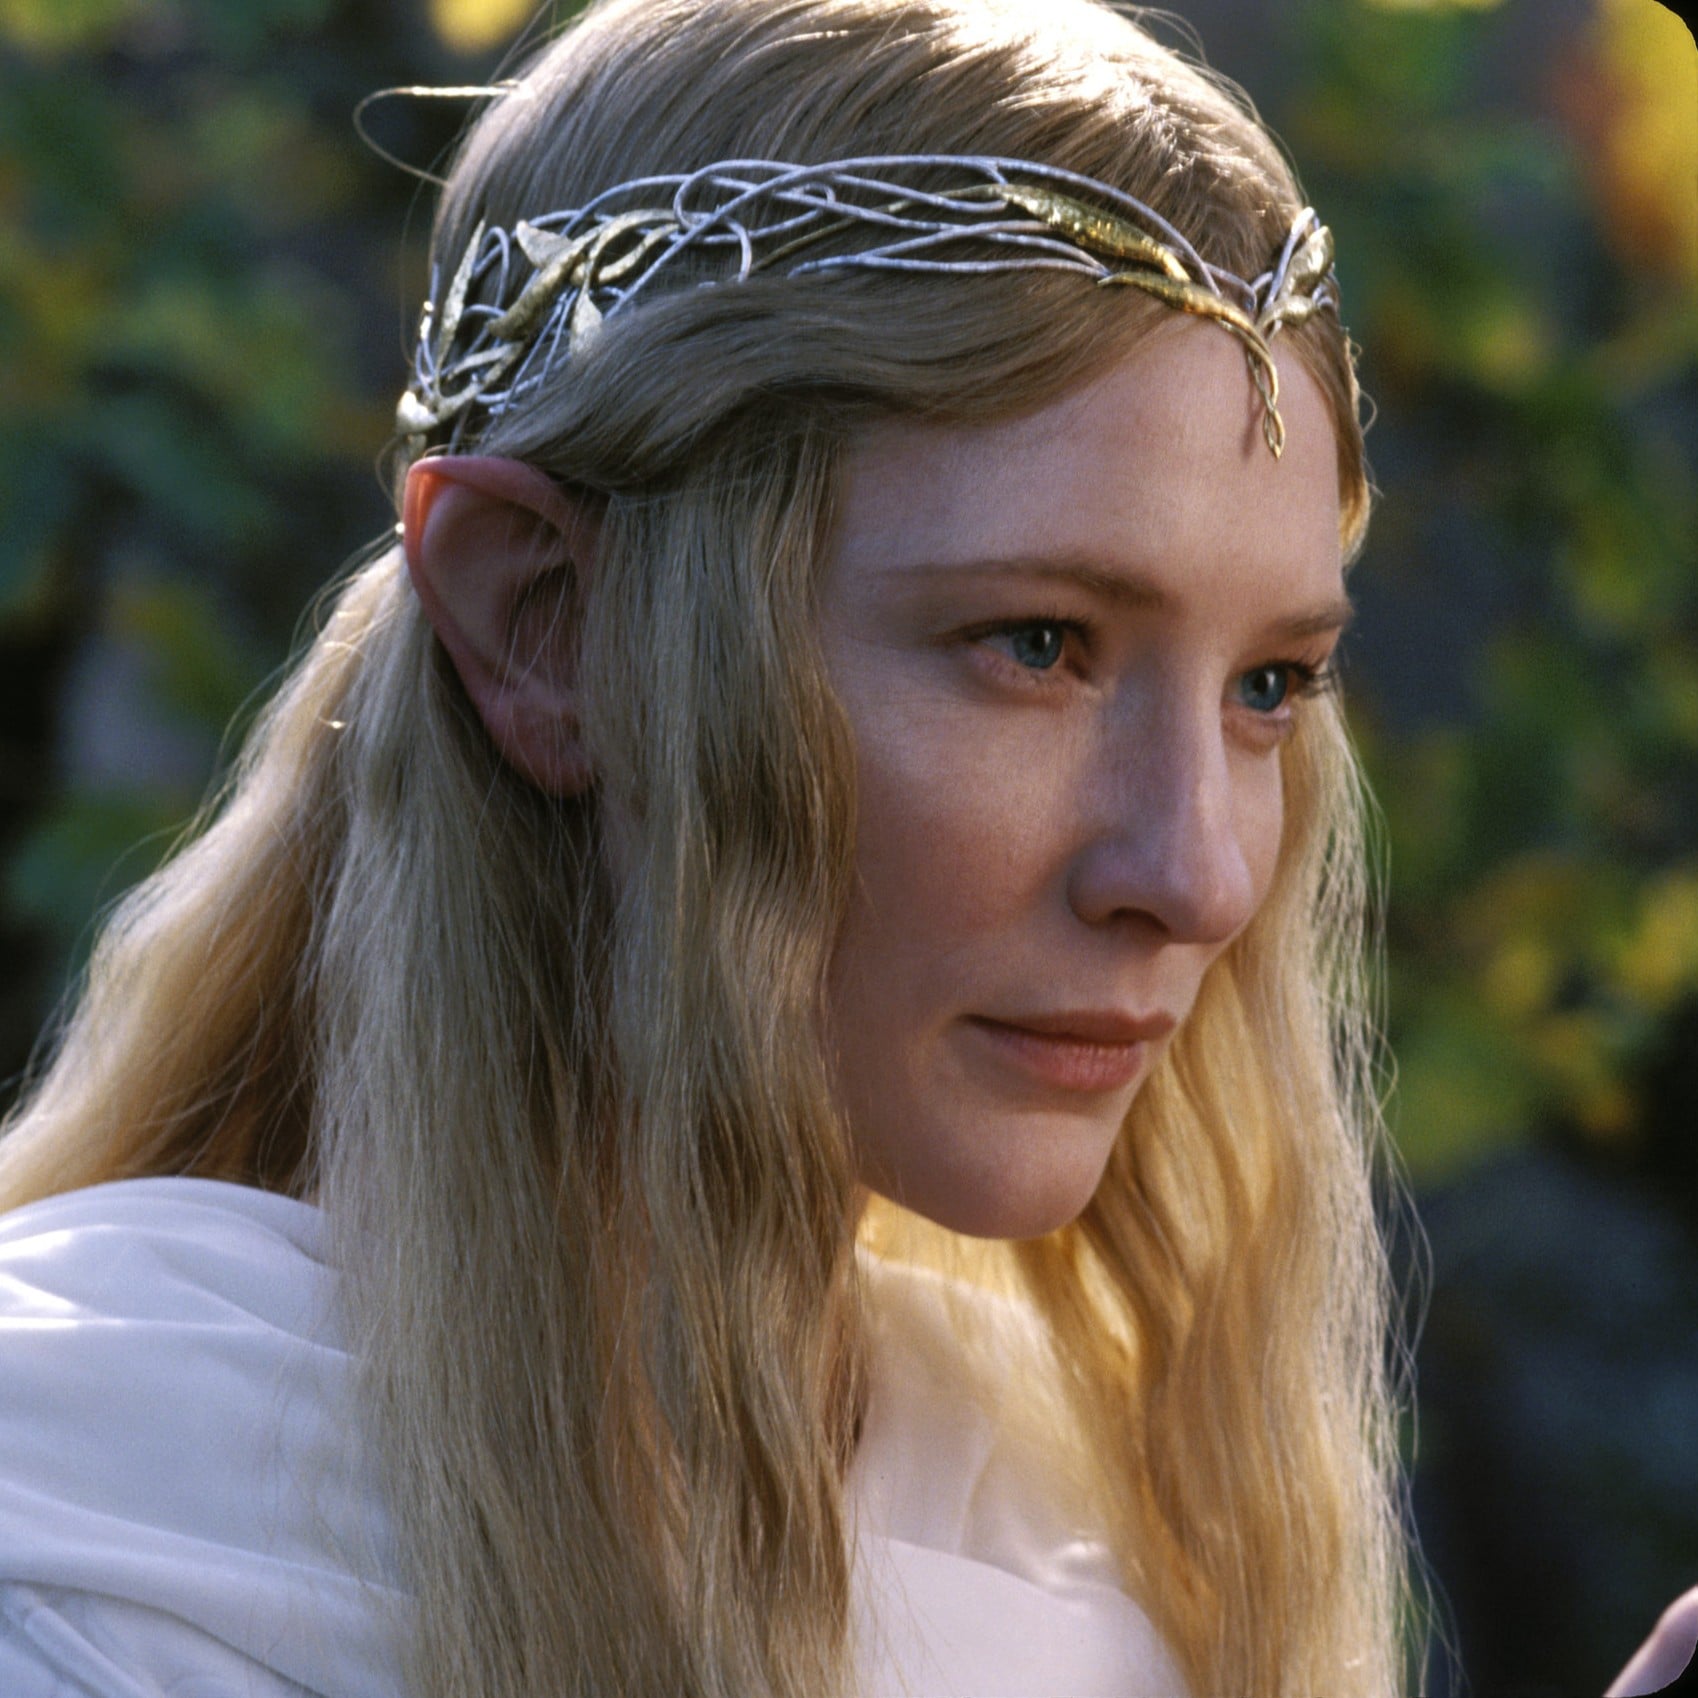 Amazon Fires Lord Of The Rings Scholar For Trying To Stop Them From Ruining  Tolkien?